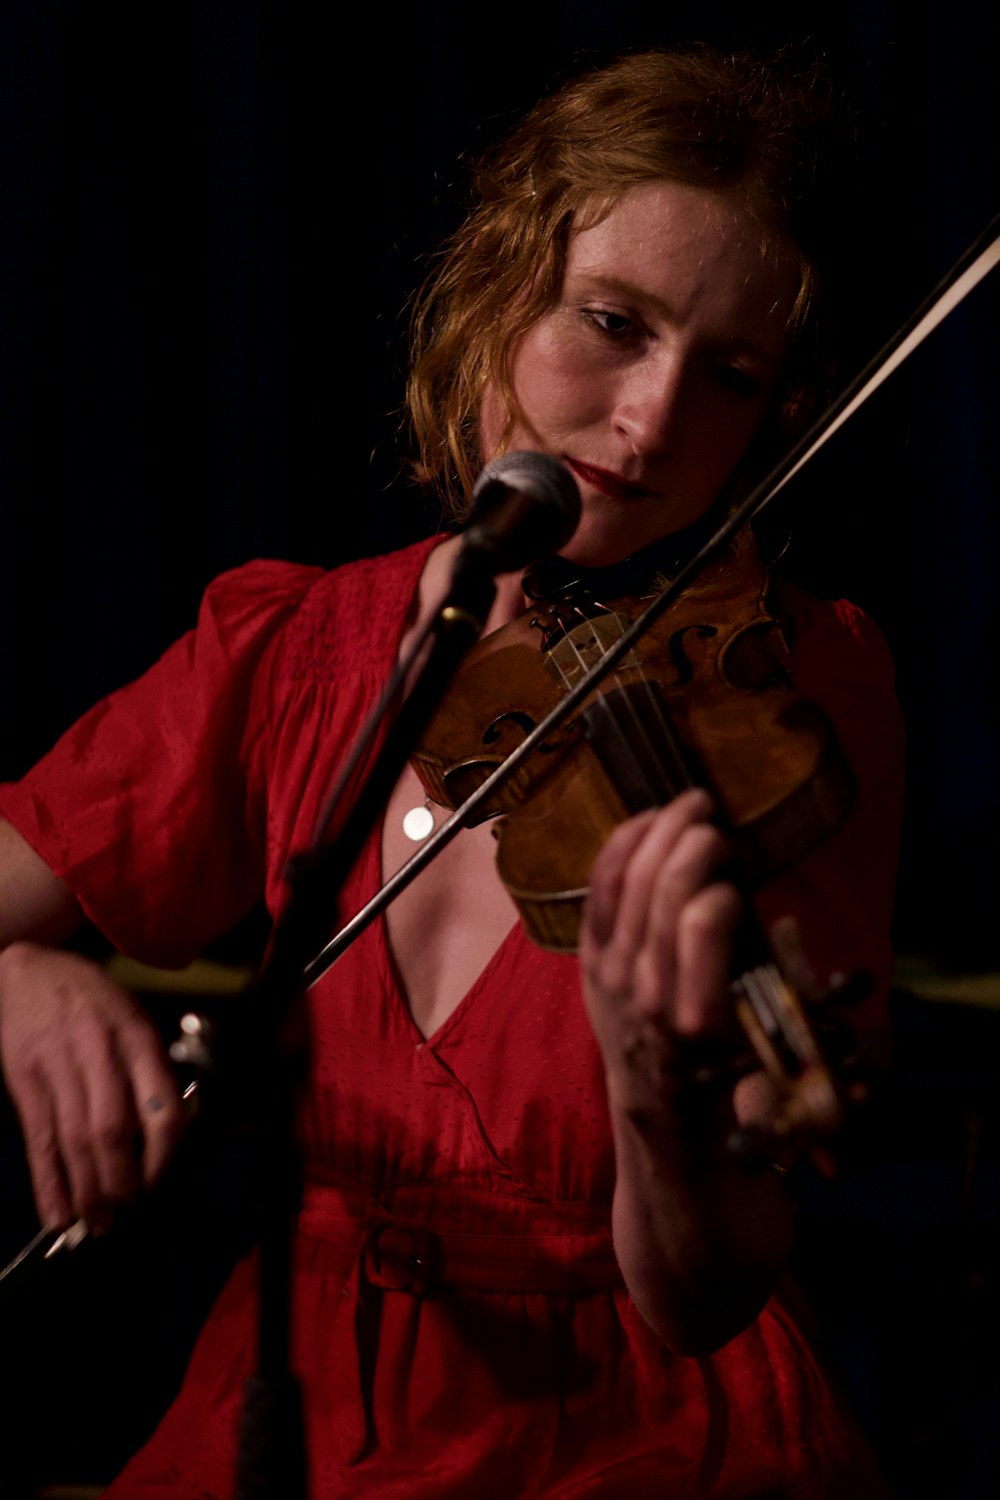 woman playing violin in front of microphone